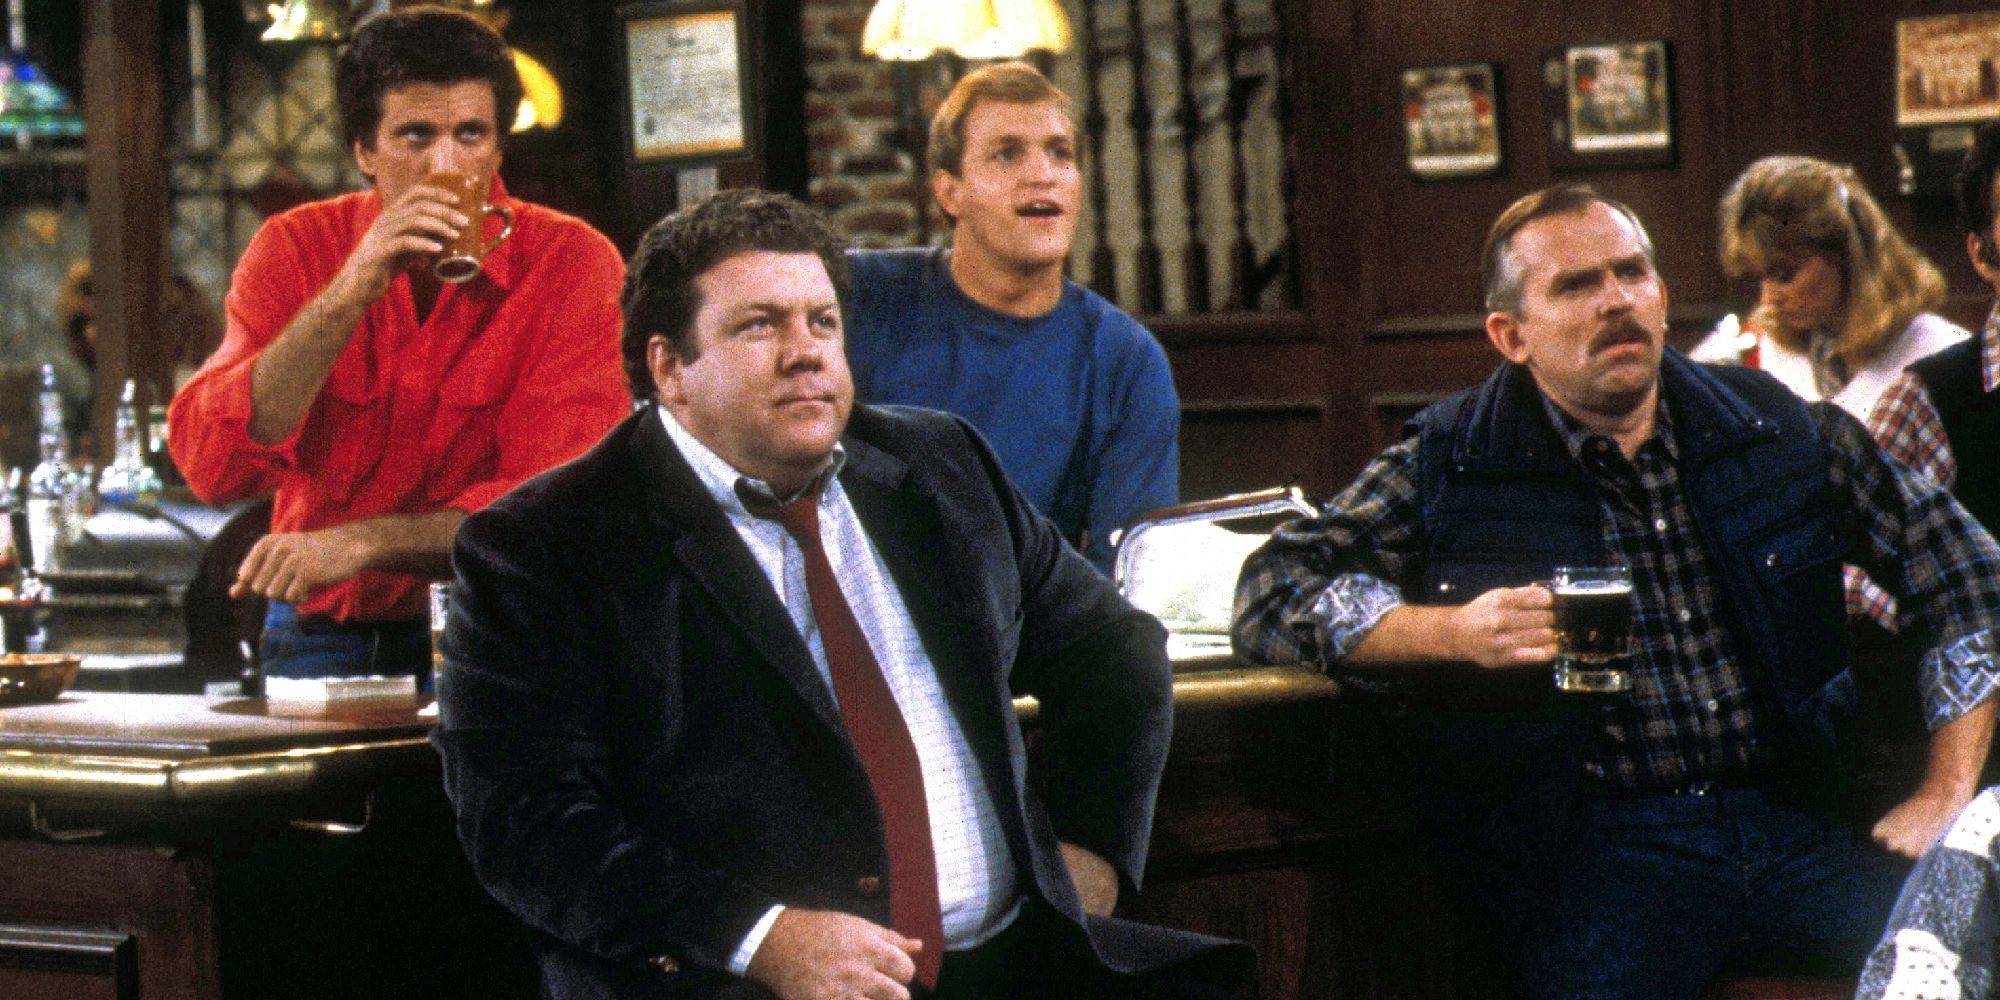 Woody Harrelson, Ted Danson, John Ratzenberger, and George Wendt in Cheers